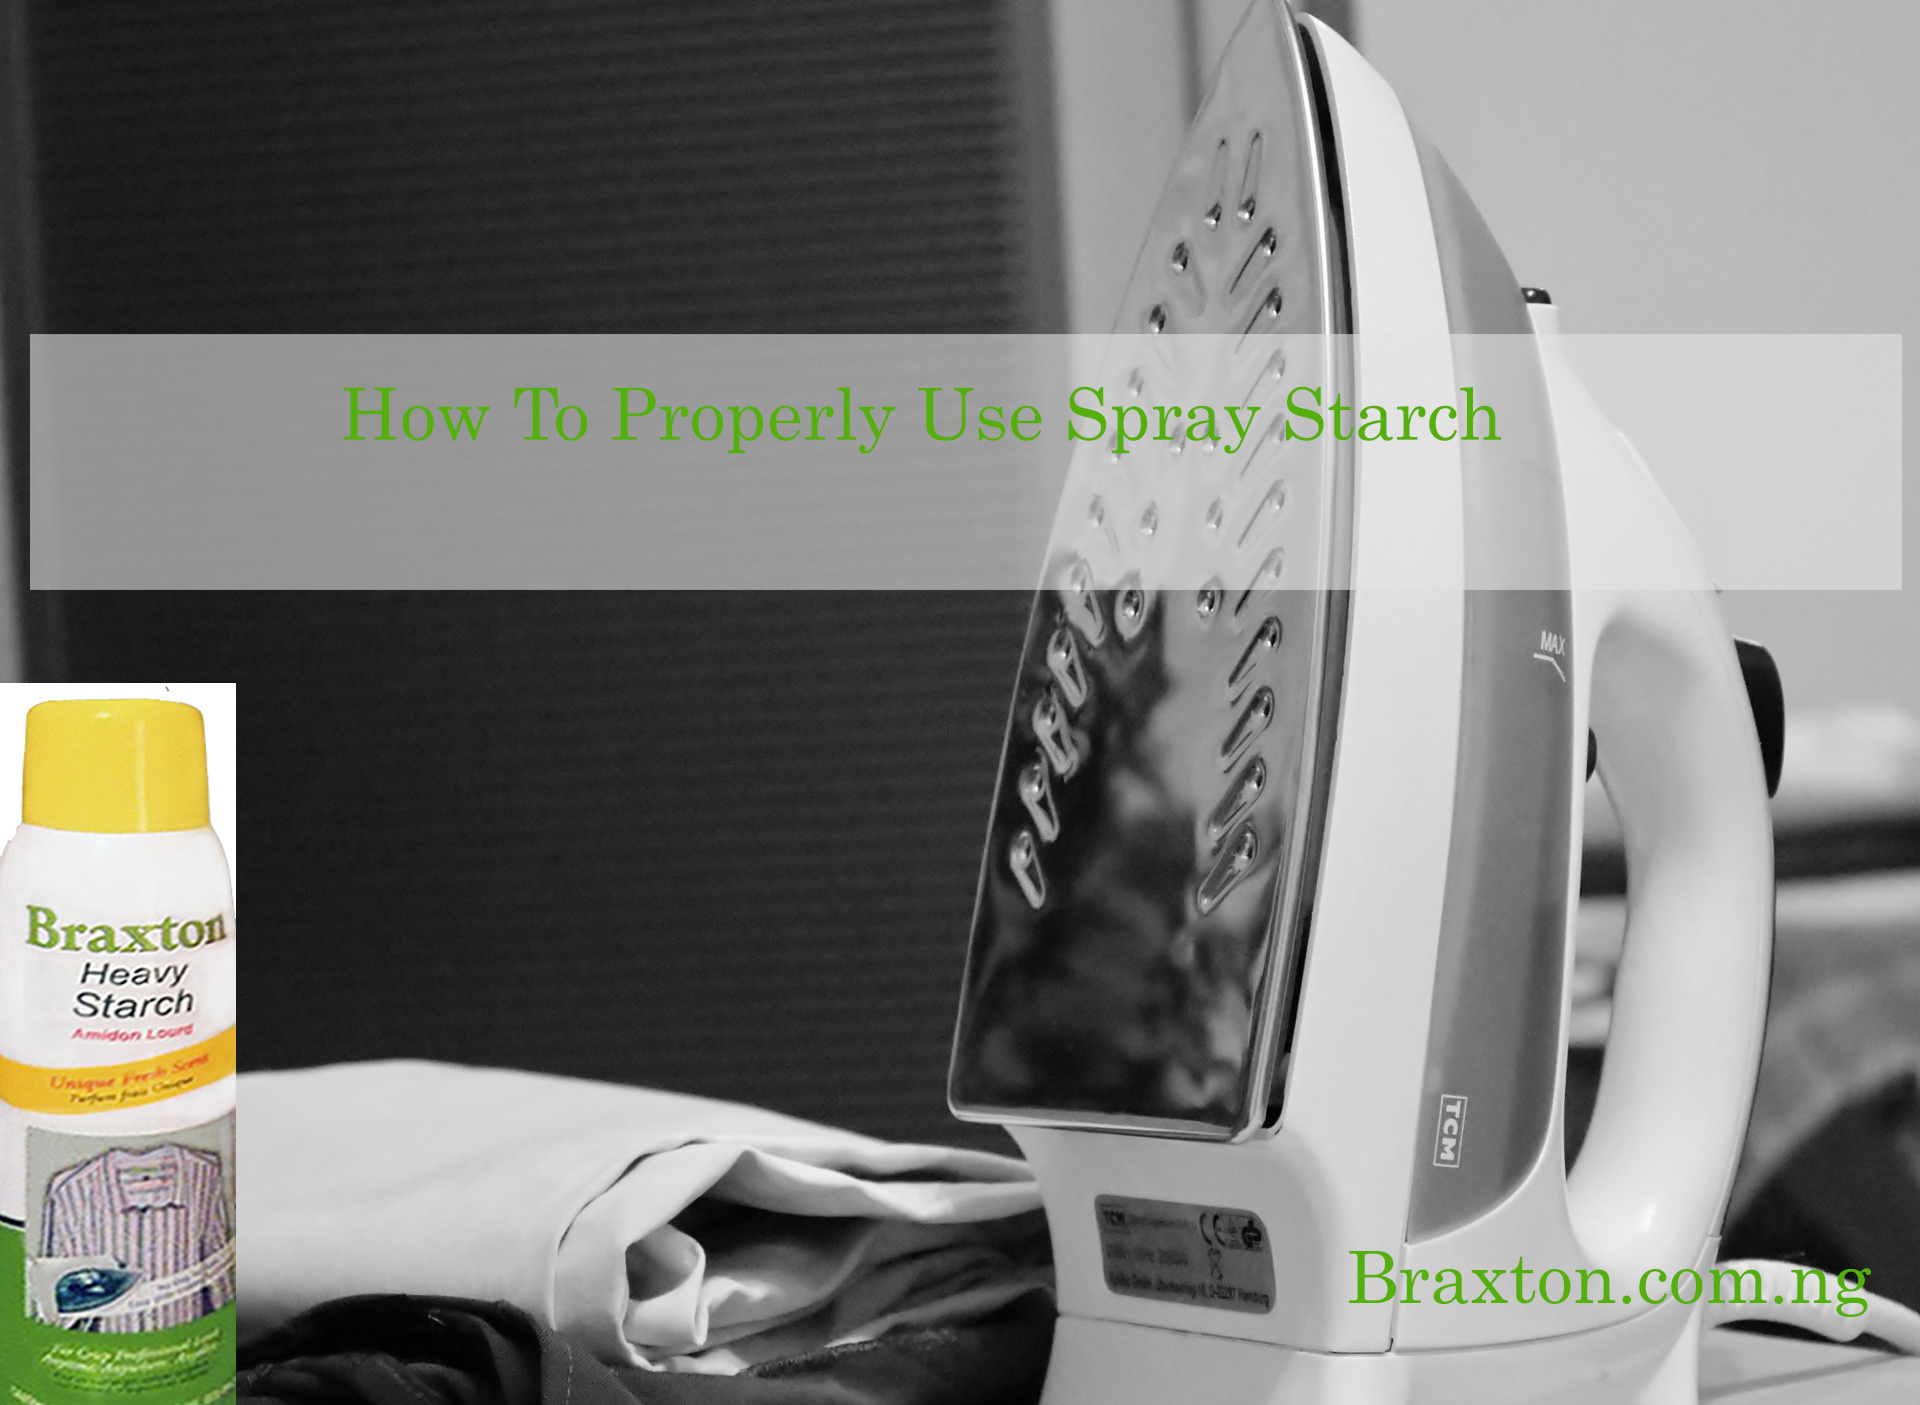 How To Use Spray Starch For The Best Clothing Apperaeance - Braxton